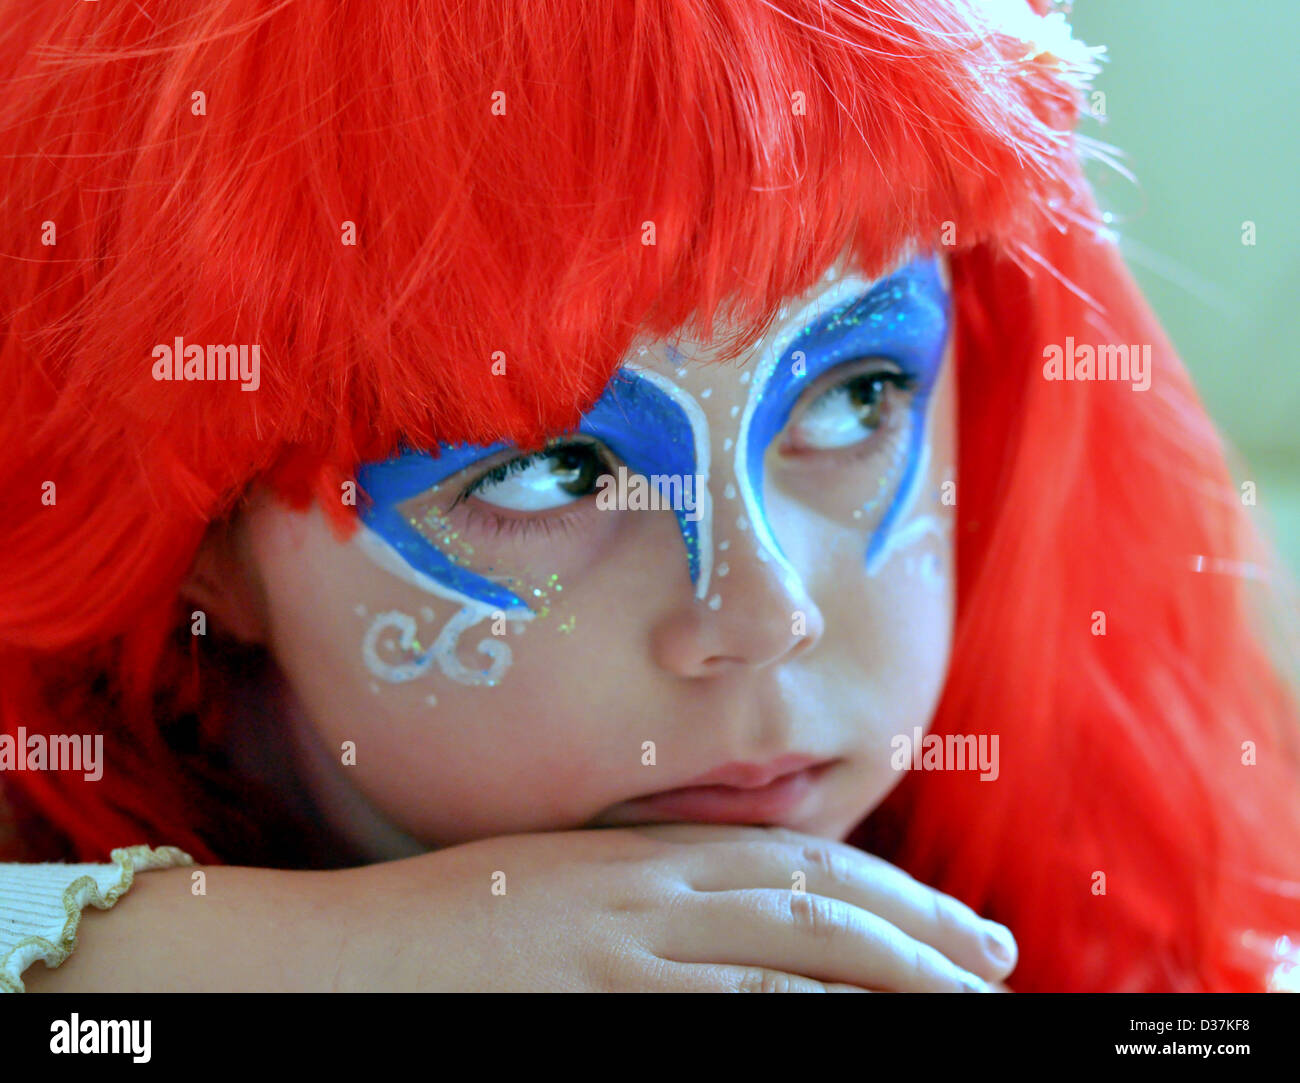 carnival, child, color, disney, face, films, girls, hair, halloween, human image, little, mermaid, paint, people, photography, Stock Photo